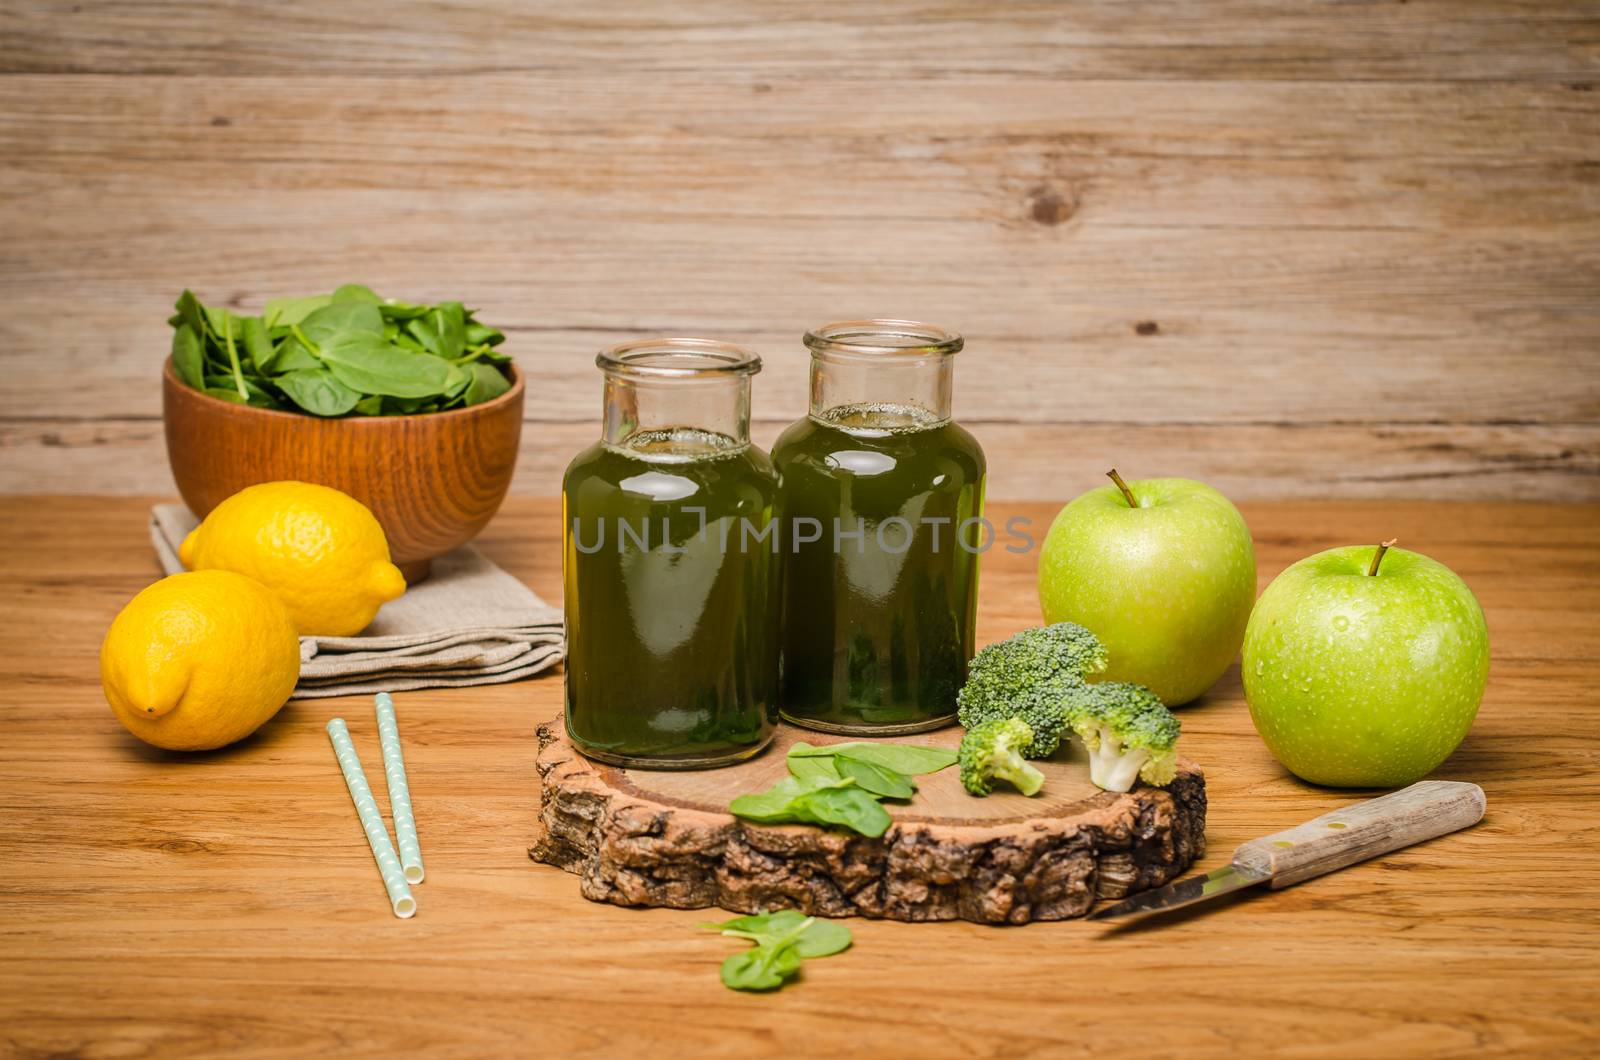 Green fresh leafy greens smoothie in glass jar, spinach leaves, apple, broccoli and lemon. Refreshing healthy drink on wooden table background